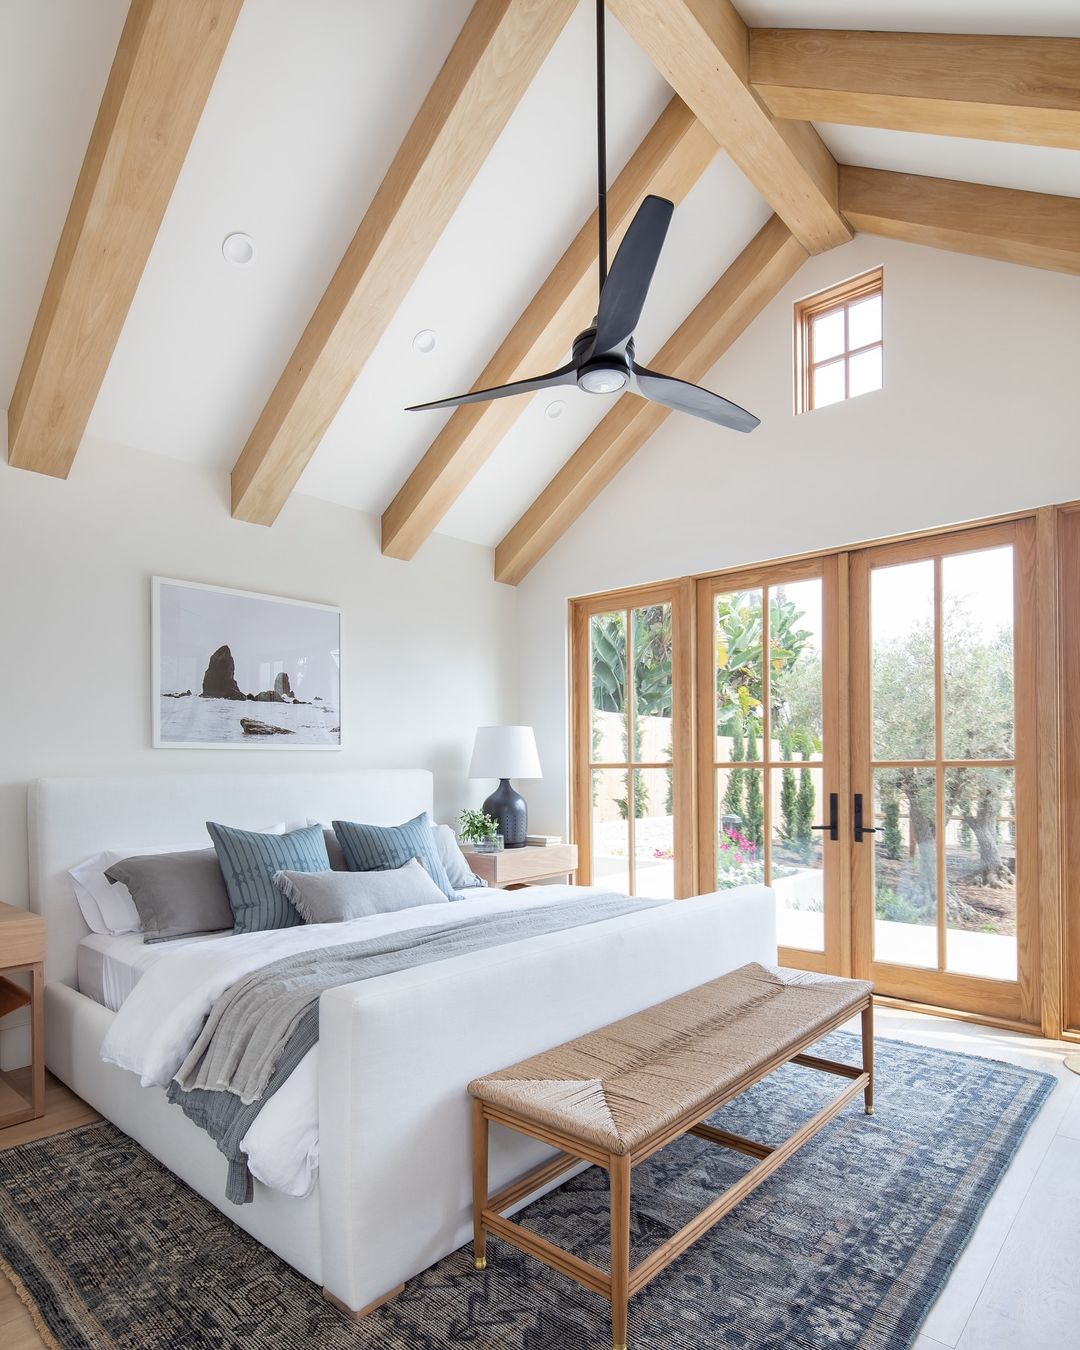 Use Exposed Beams and Natural Light for an Airy Retreat